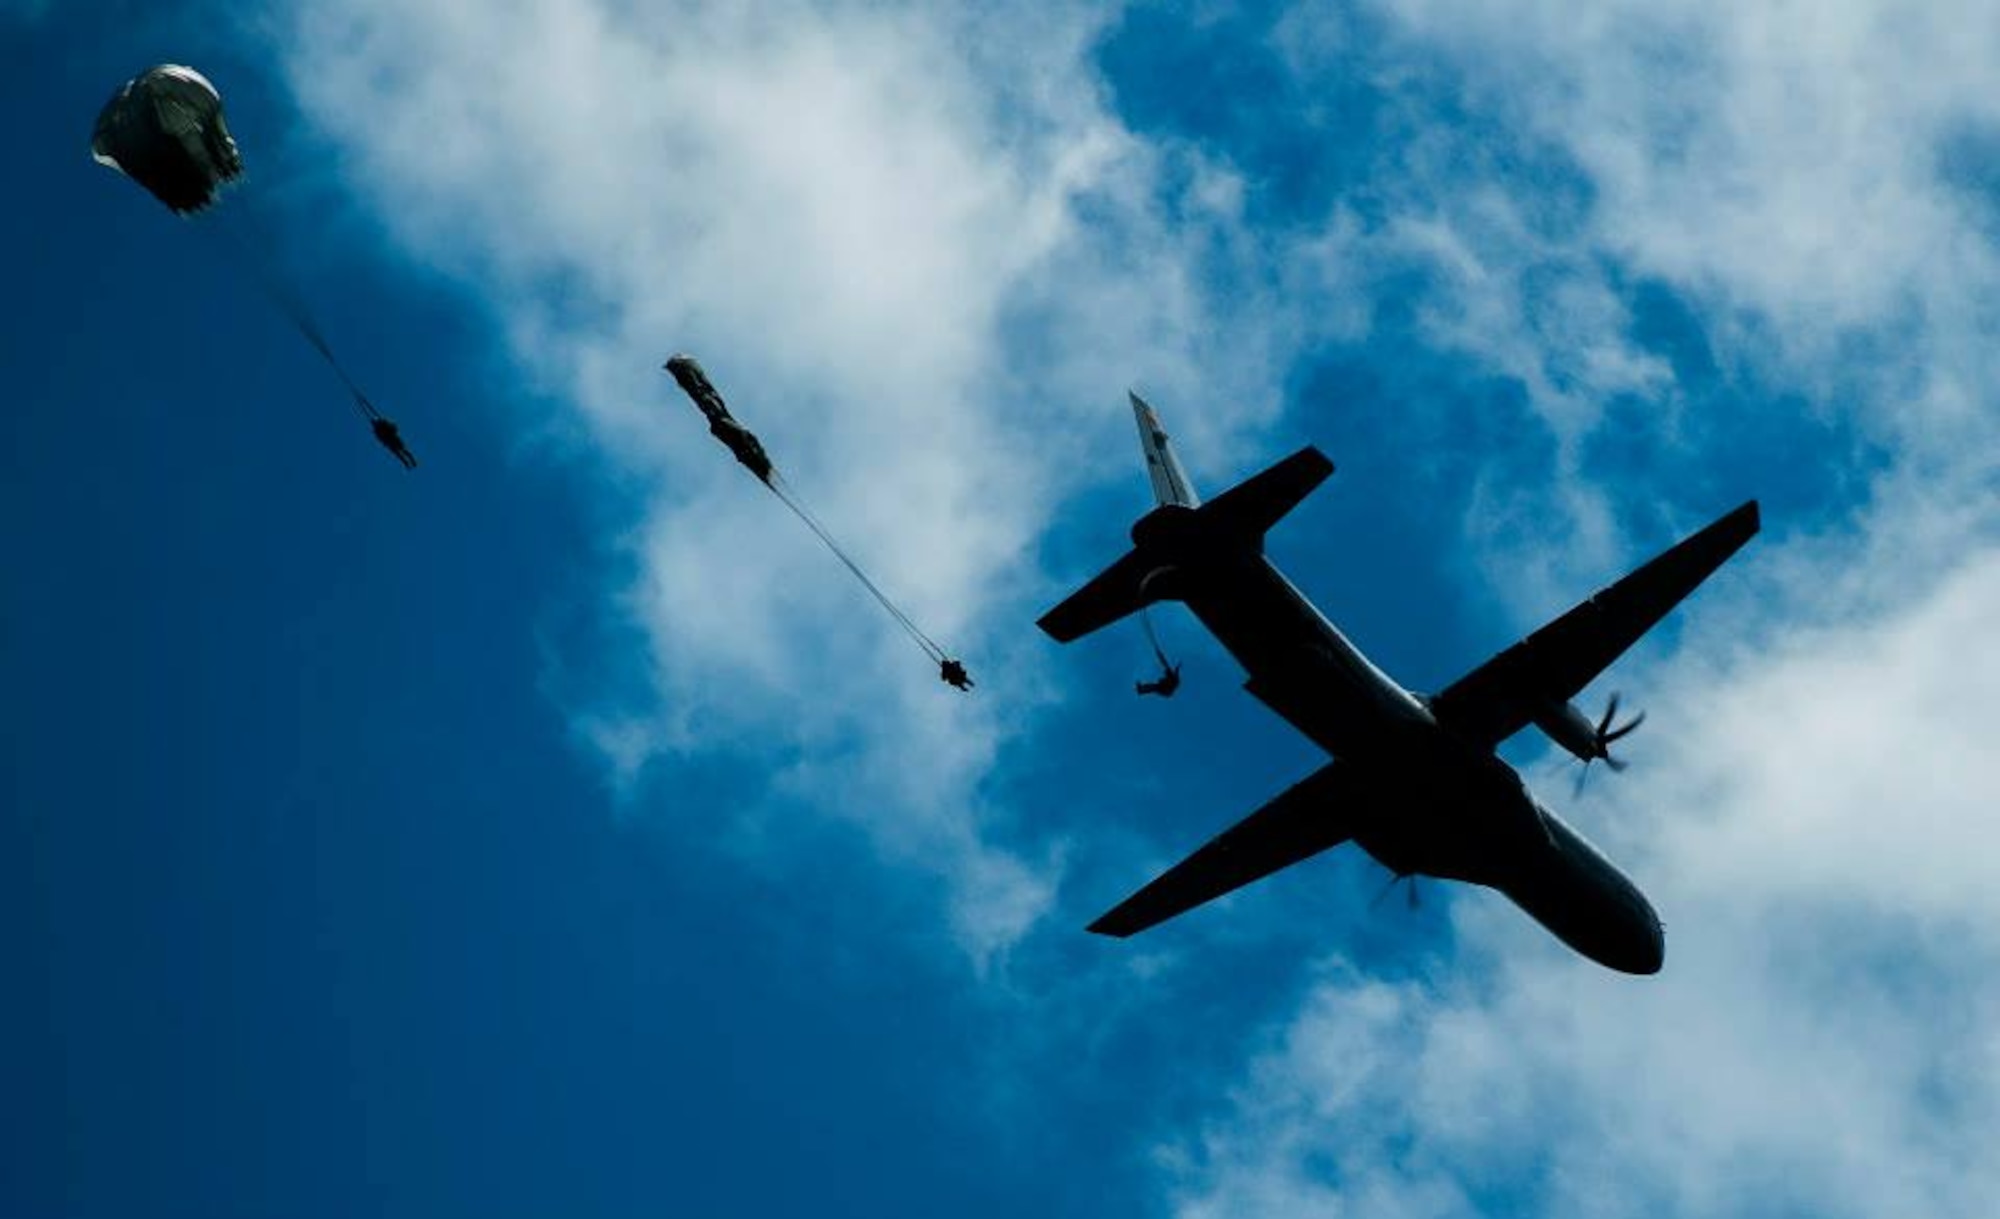 Five members of the Colombia air force parachute from a Colombian air force Casa 295 aircraft, attempting to land on target during the first airdrop with U.S. Air Force personnel March 3, 2015, at Marandua Air Base in Colombia. (U.S. Air Force photo/Tech. Sgt. Matthew Hannen)